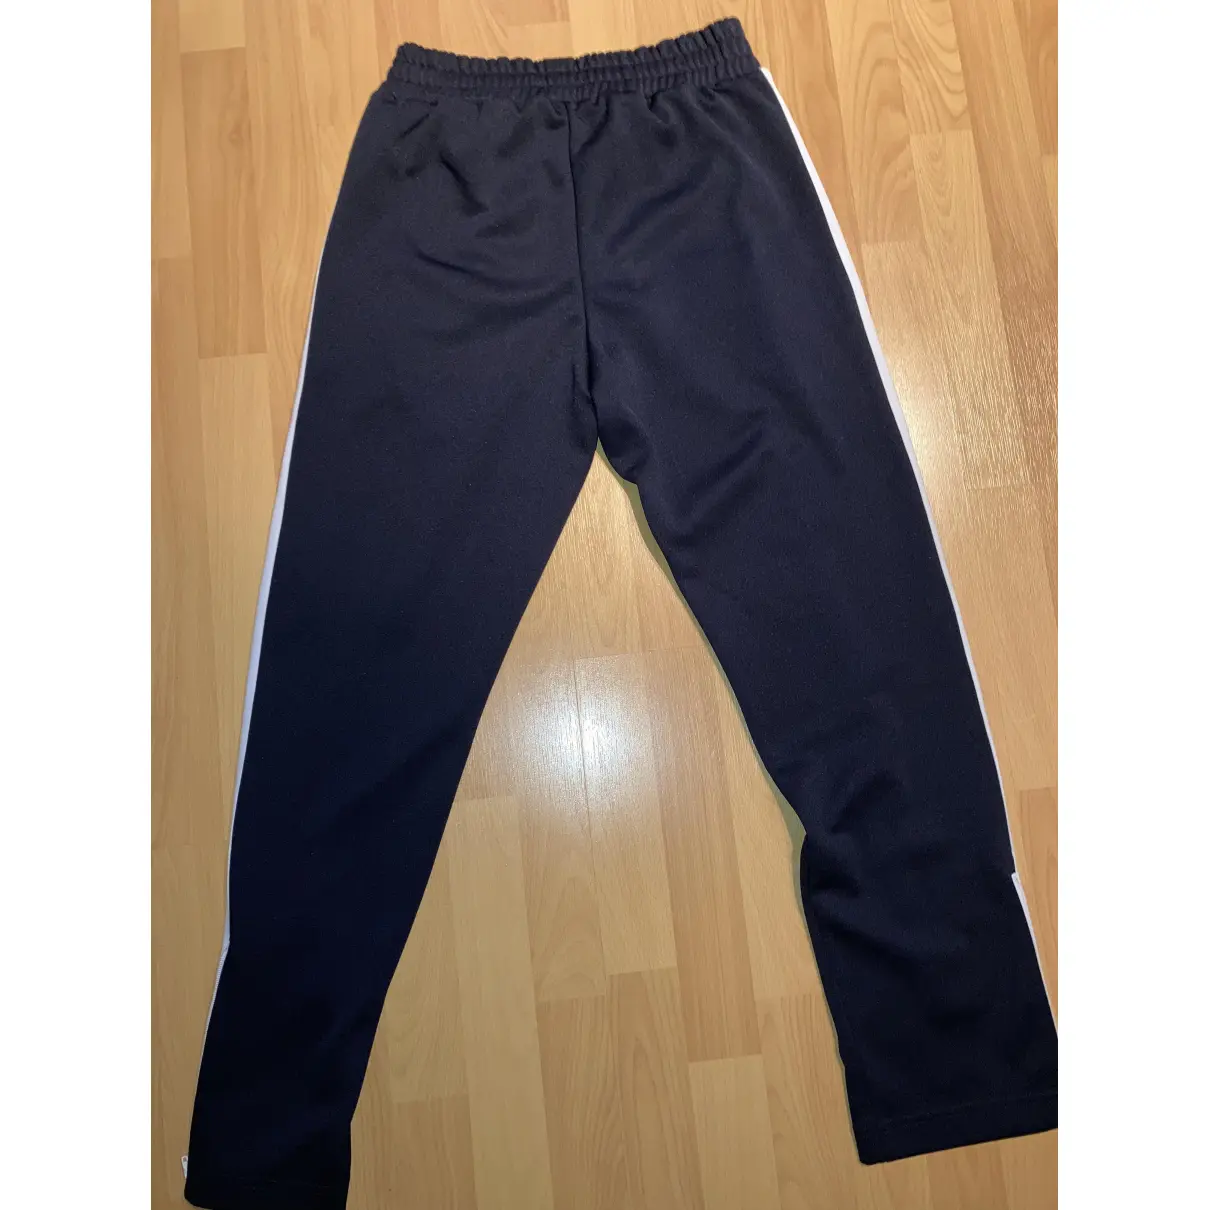 Buy Palm Angels Trousers online